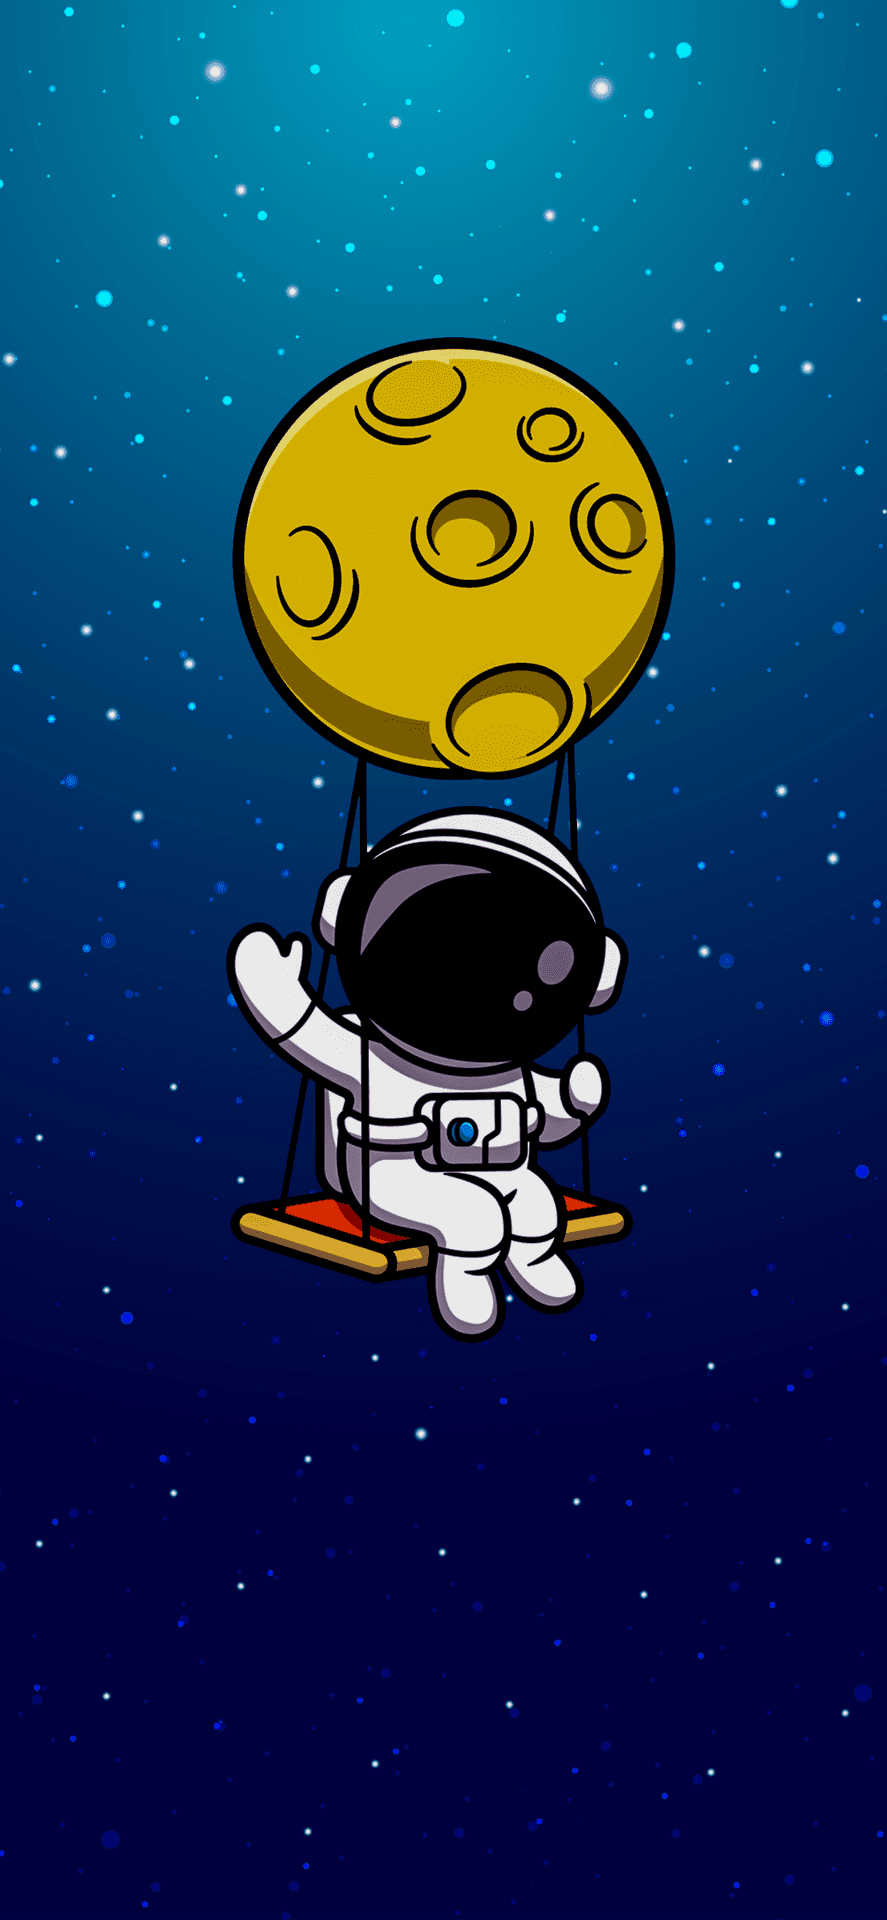 "astronaut Floating In Space"